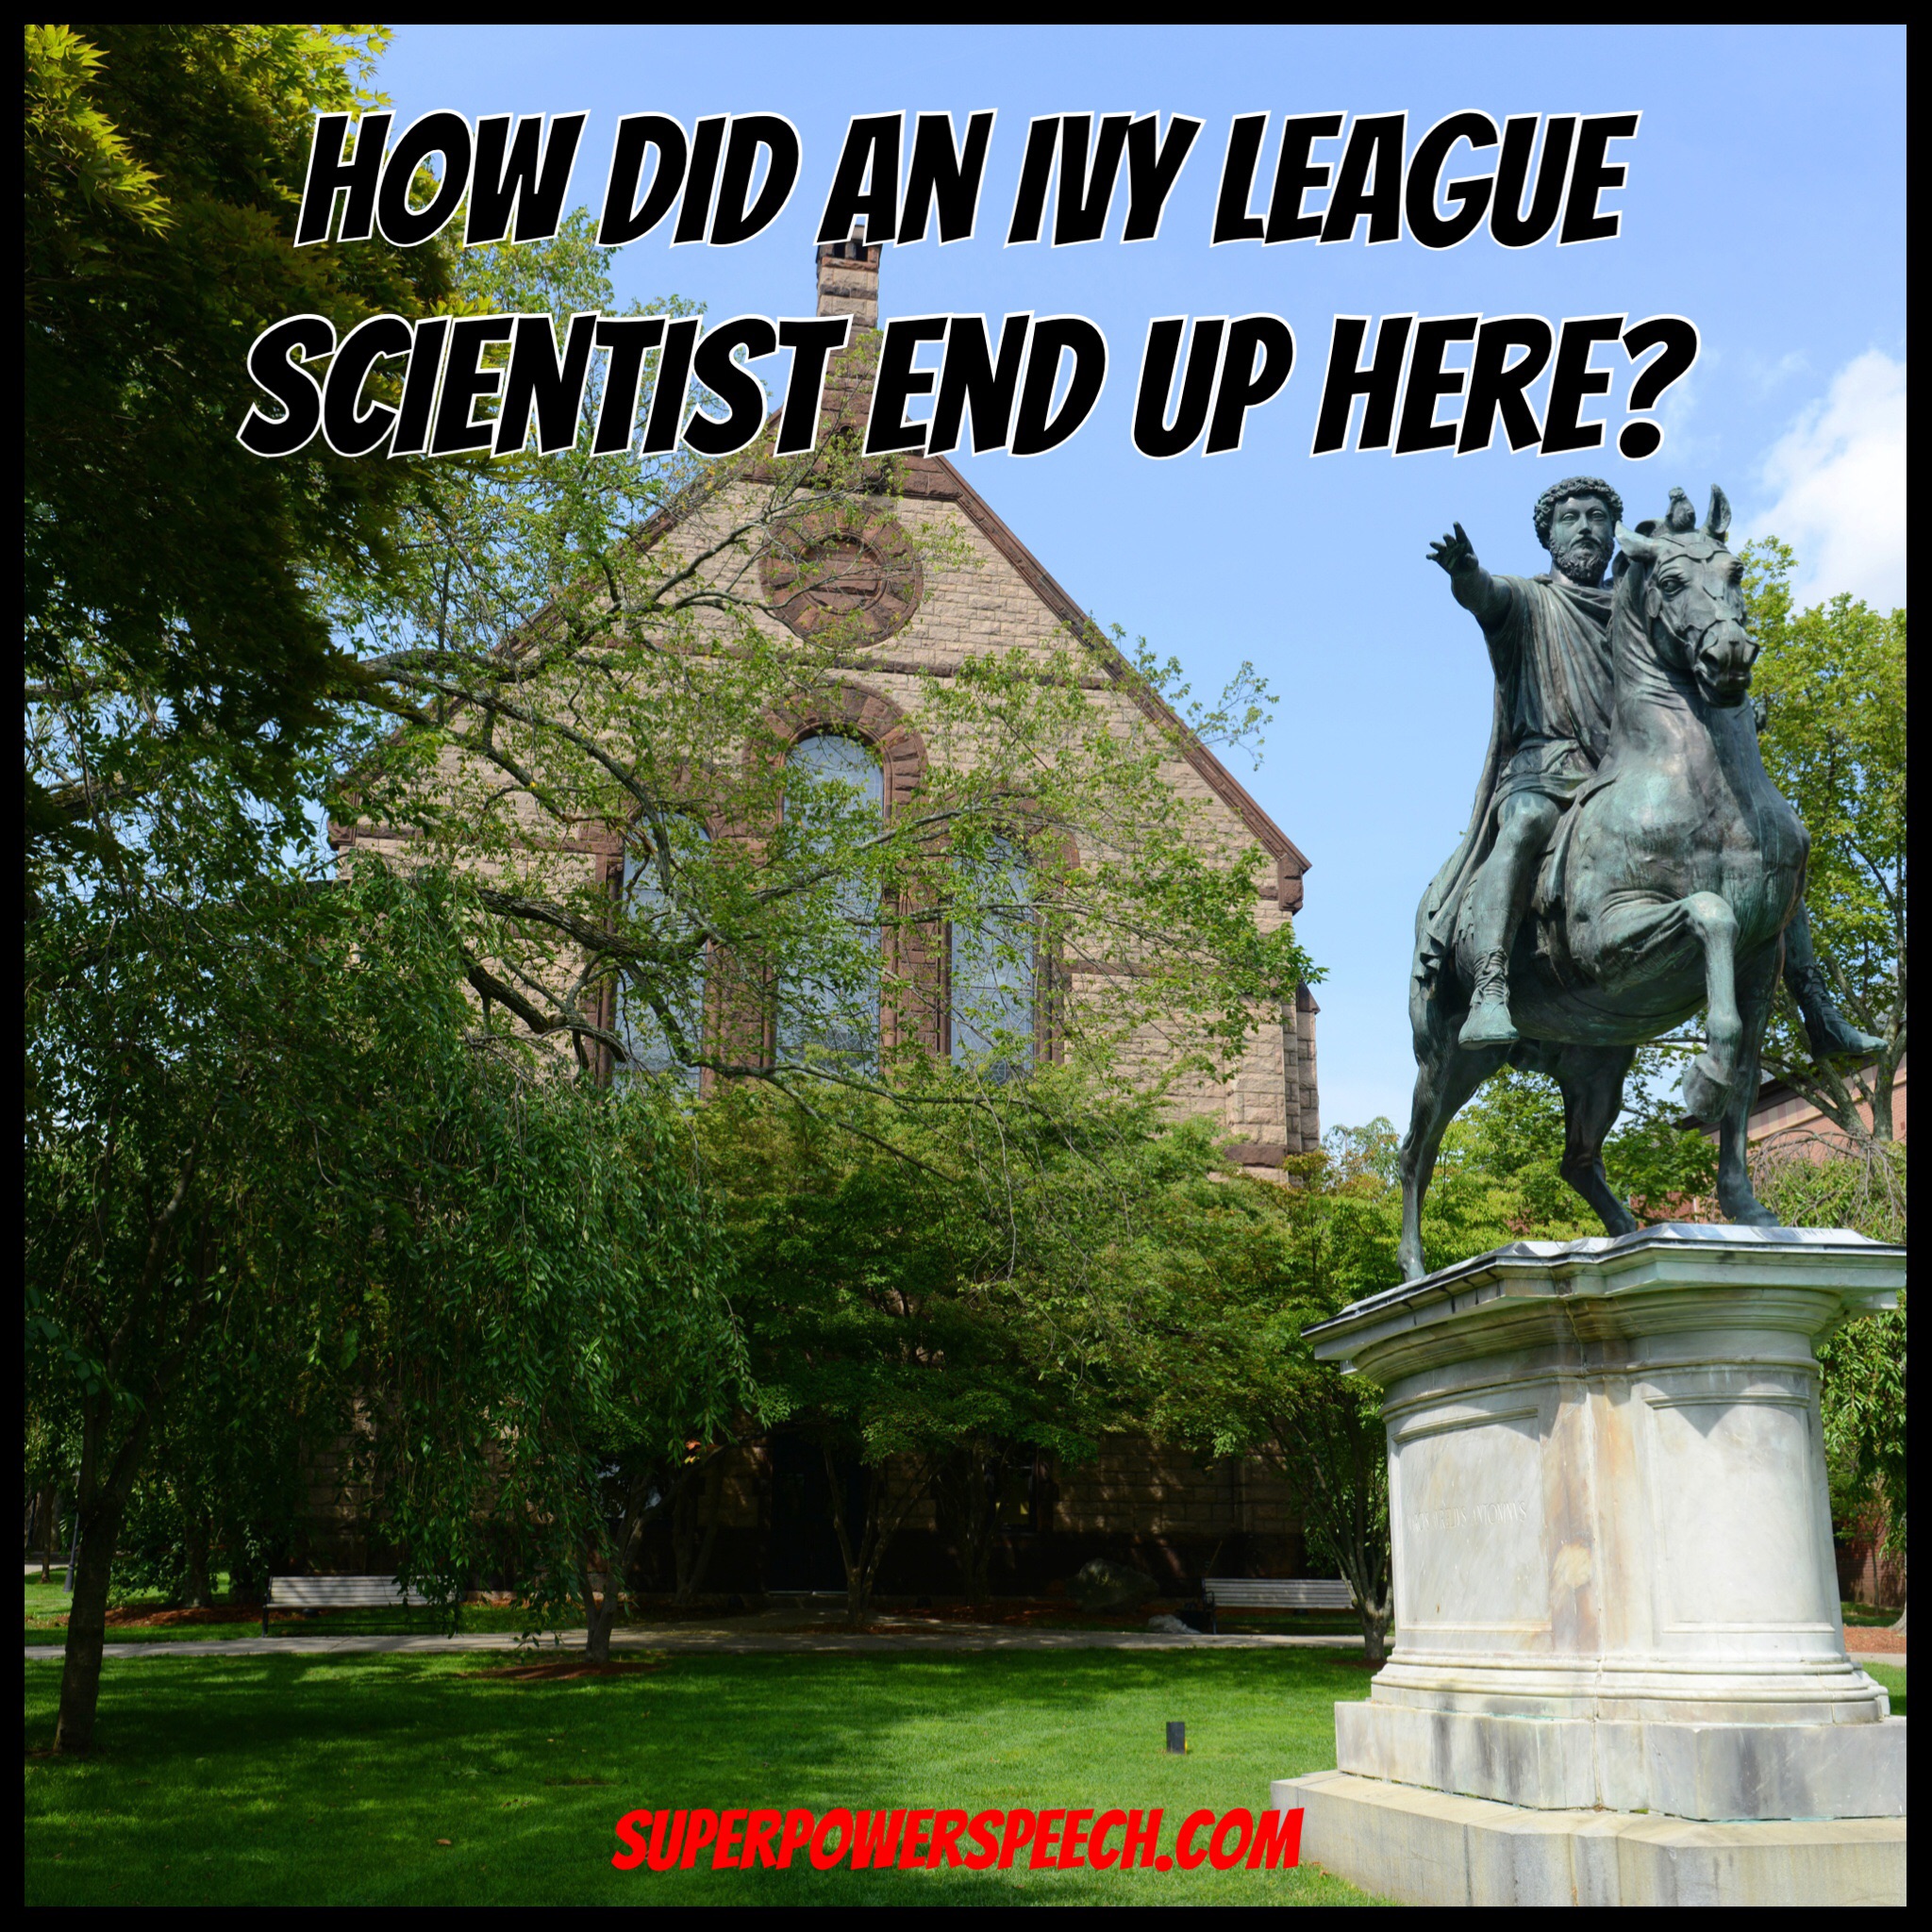 How Did an Ivy League Scientist End Up Here?